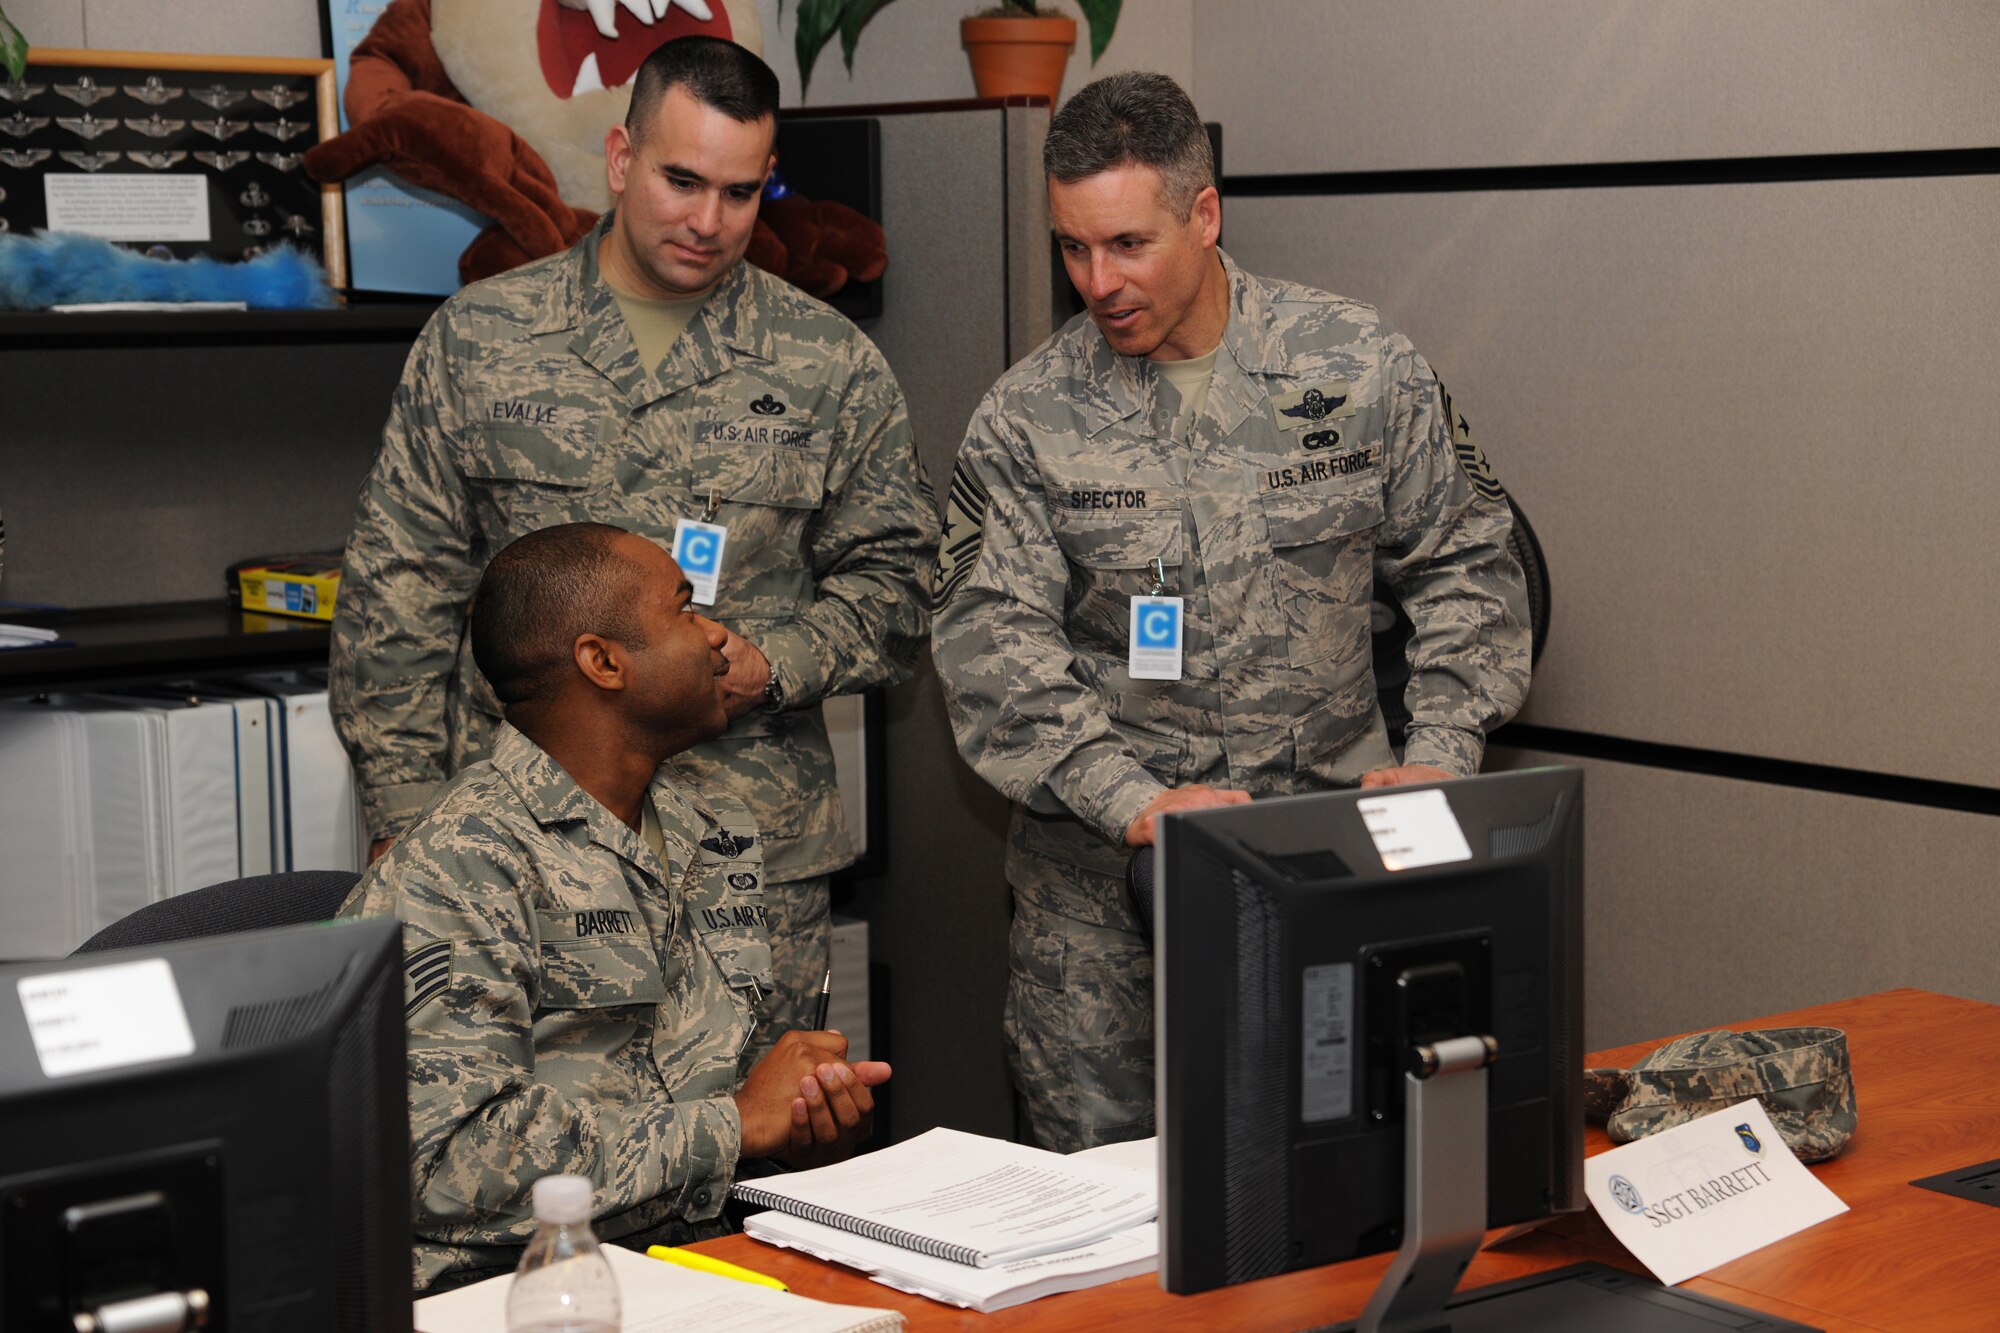 Chief Master Sgt. David Spector, Air Mobility Command command chief, and Chief Master Sgt. John Evalle, 436th Air Wing Command Chief, speak with a student in the Aviation Resource Management System Report Writer course March 3 during a tour of the U.S. Air Force Expeditionary Center.  Chief Spector hosted a 12 Outstanding Airman of the Year conference at the Expeditionary Center to assist other AMC command chiefs experience what the Center has to offer.  (U.S. Air Force Photo/Staff Sgt. Nathan G. Bevier)